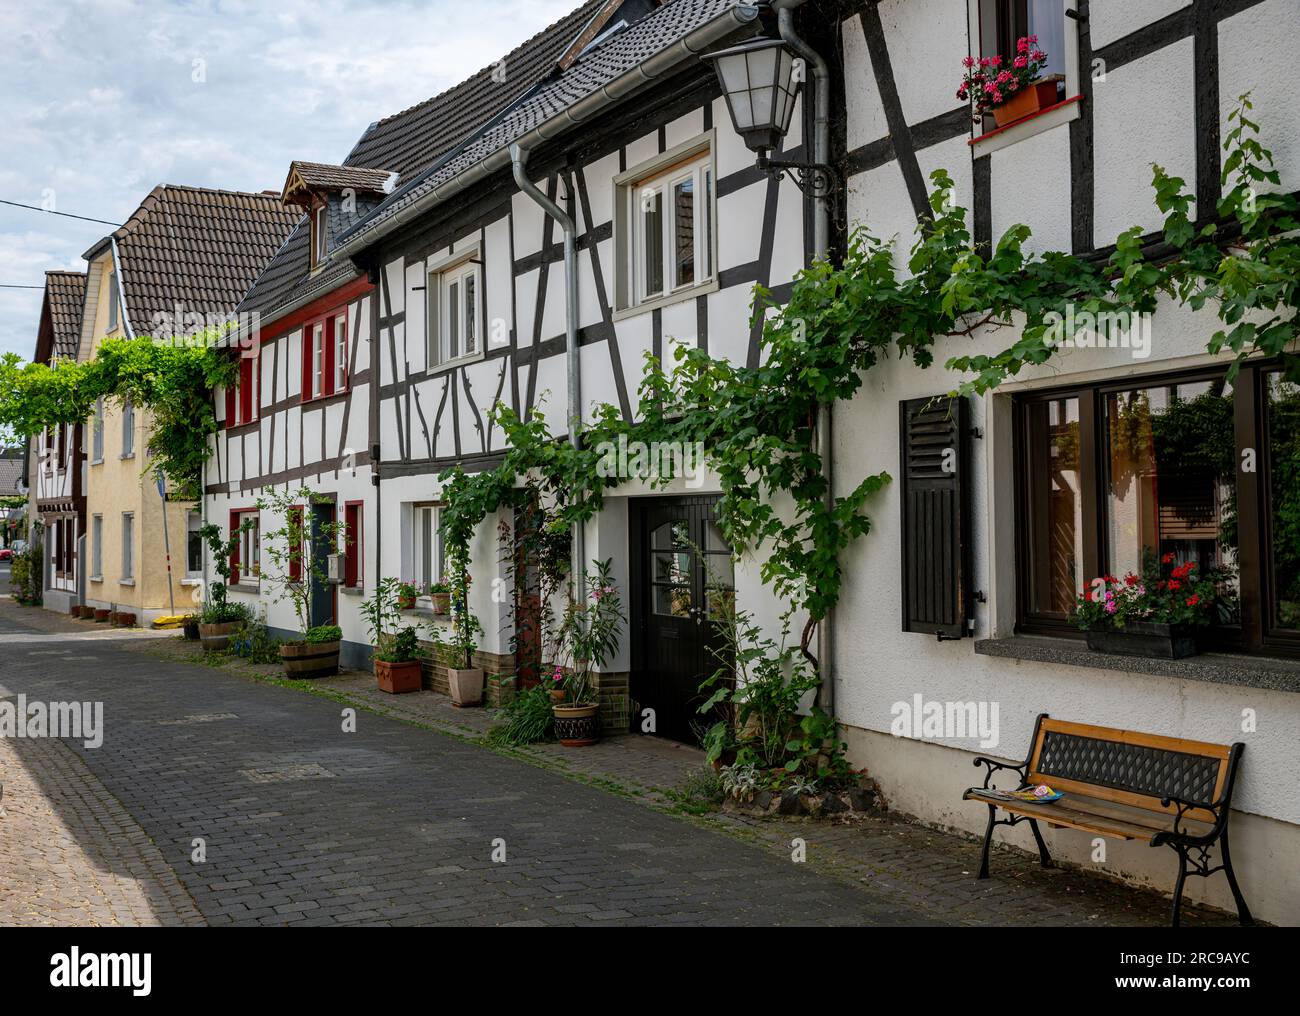 the grape vines grow along the half timbered houses in the town of erpel in germany Stock Photo